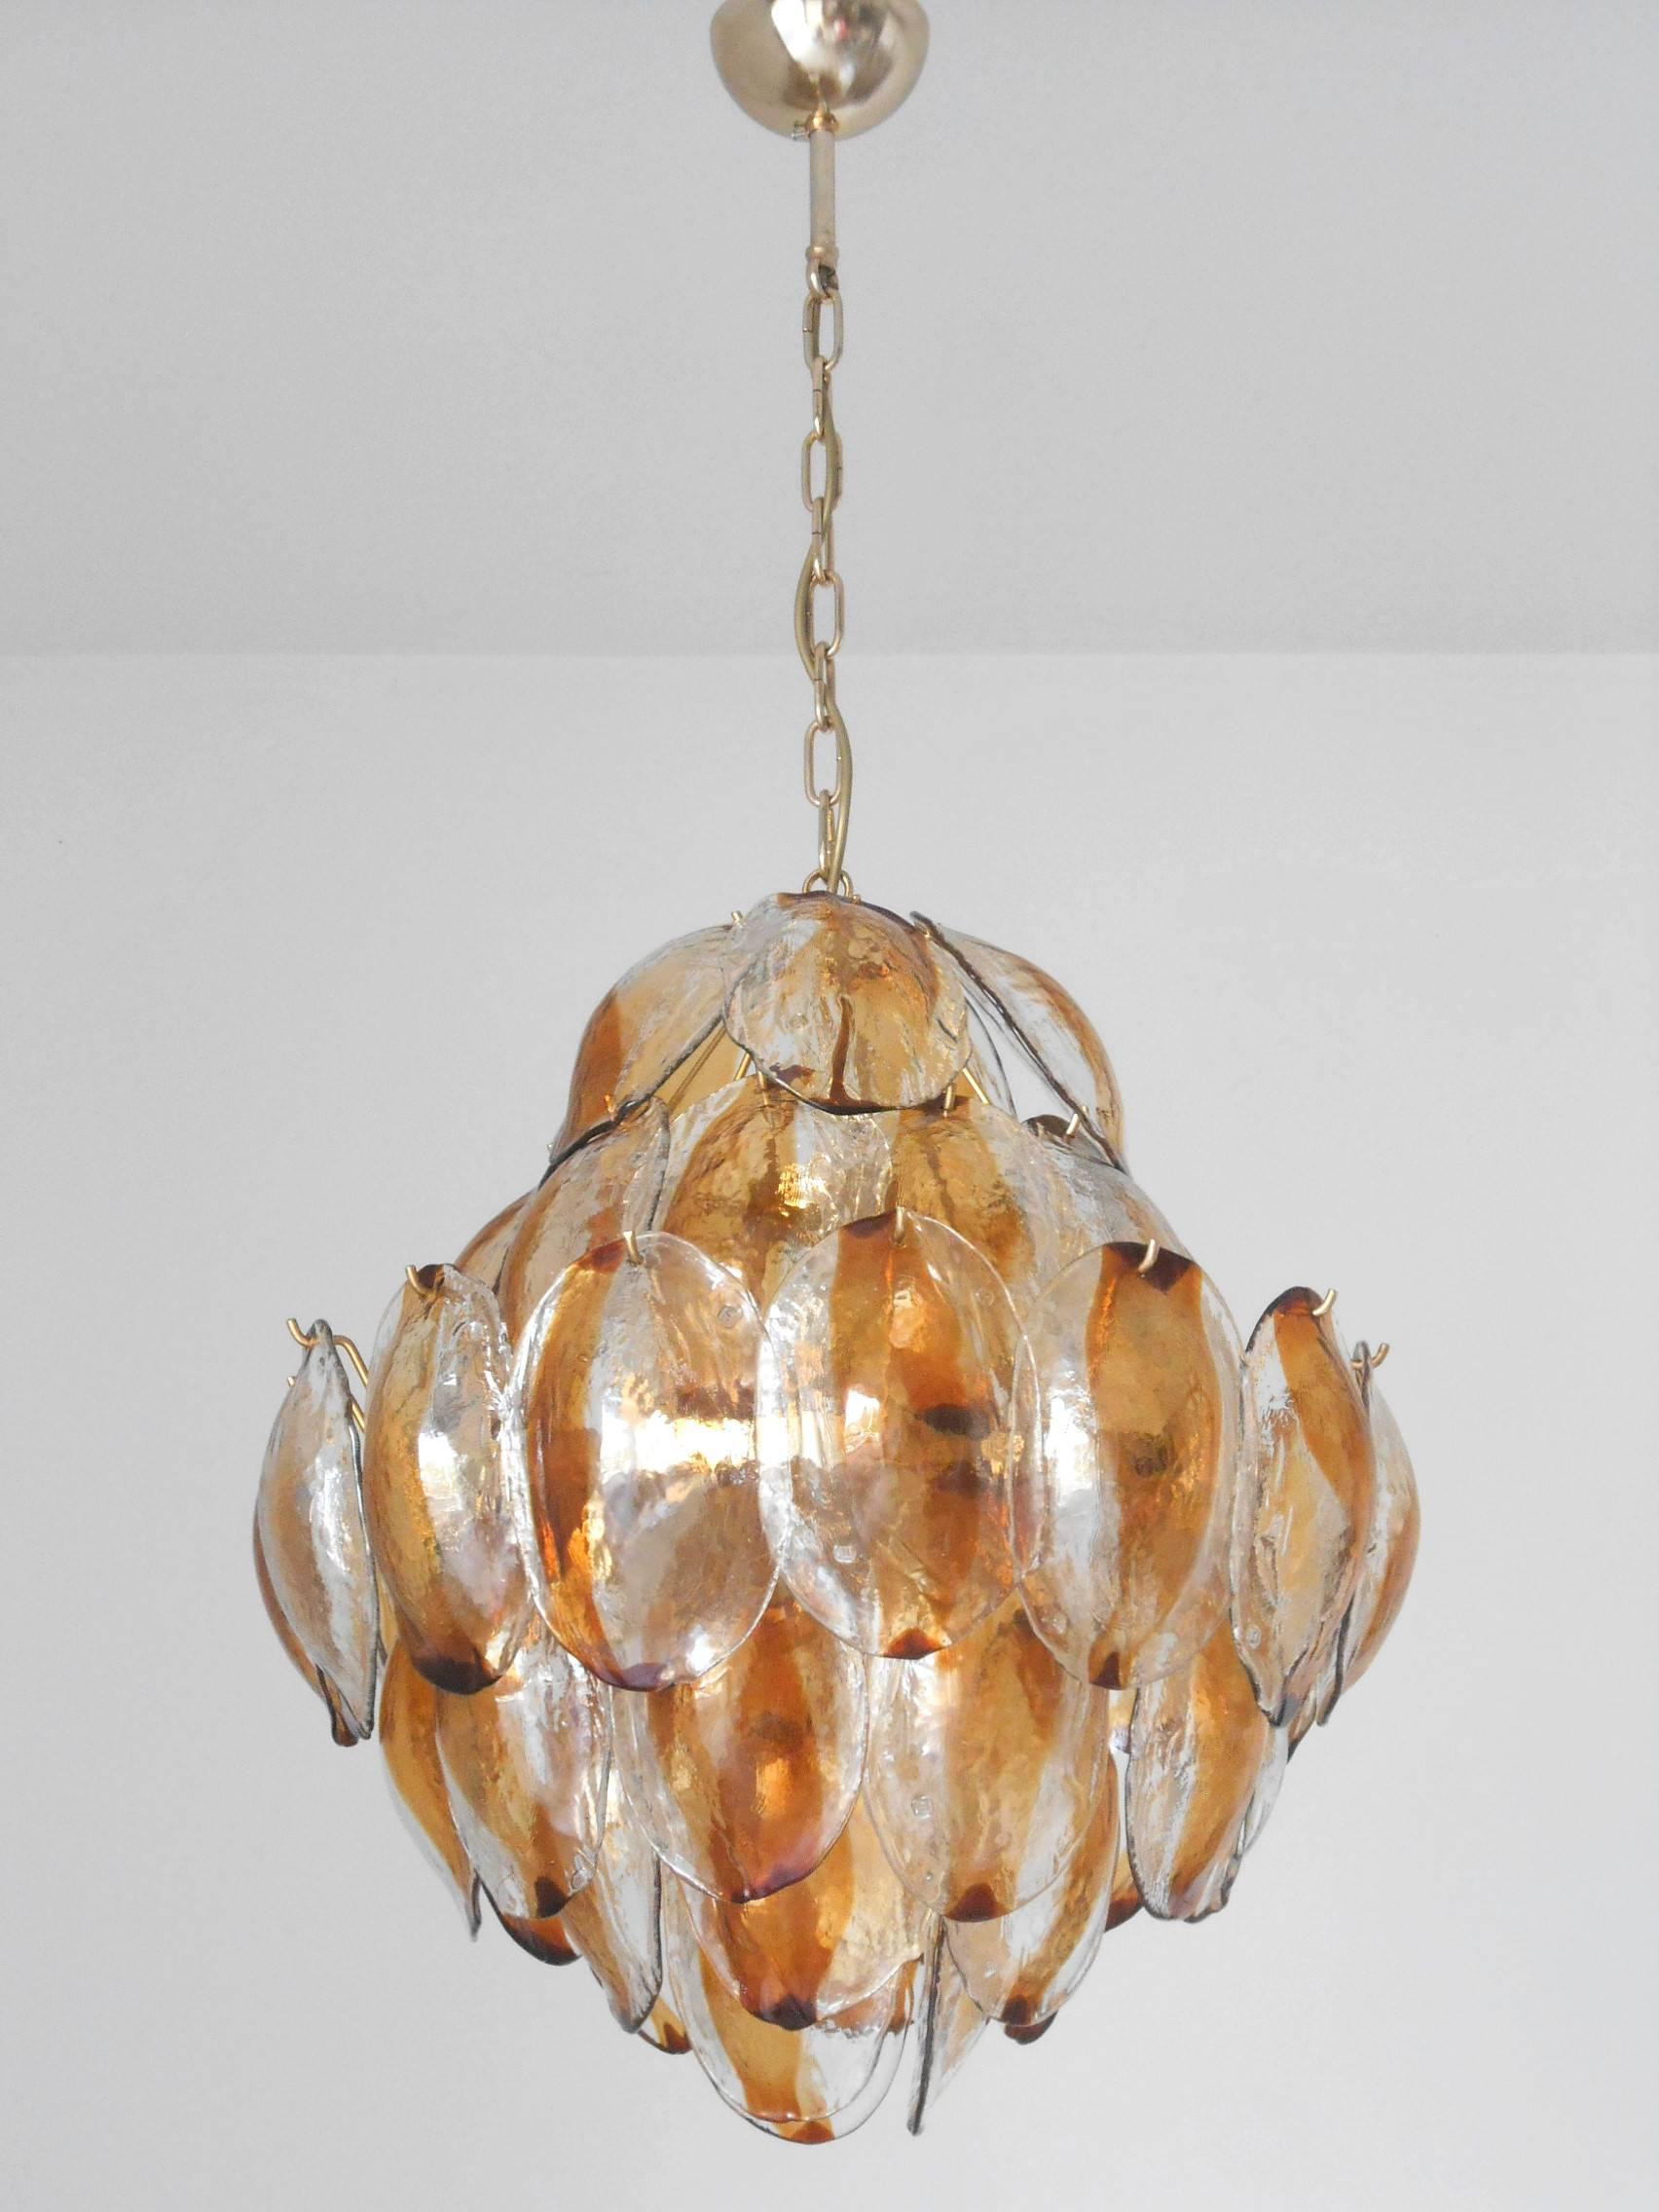 Italian vintage chandelier by La Murrina, with amber Murano glass shells. Original mark on some of the glass pieces.
Twelve-light sockets, wired for the U.S.